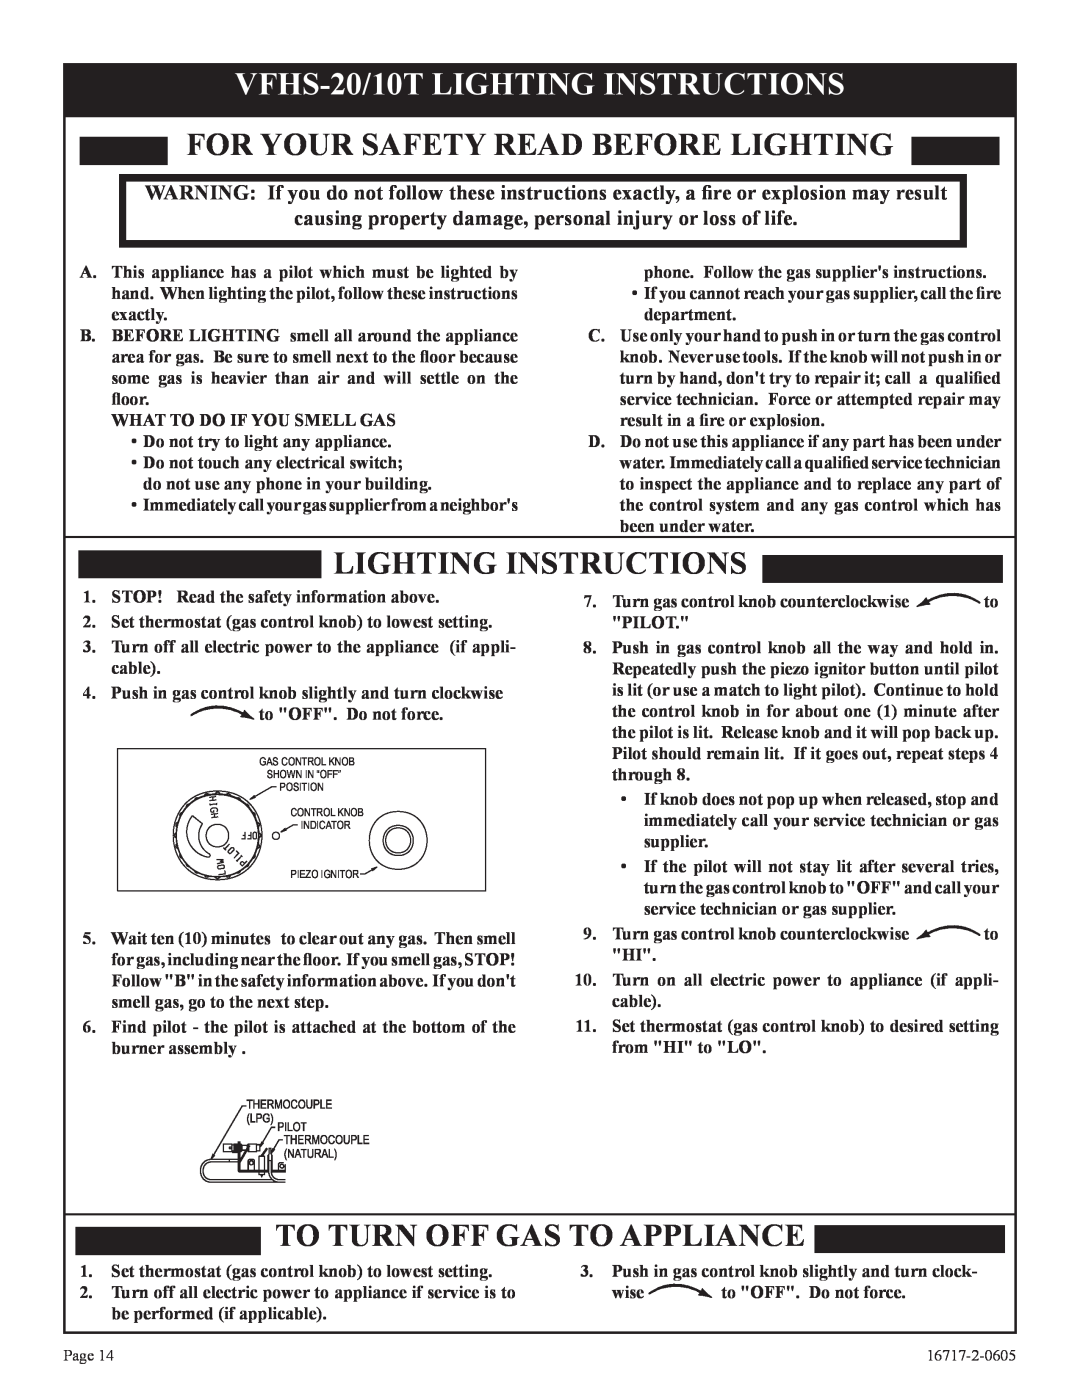 Empire Comfort Systems VFHS-20R-4, VFHS-20/10T-4 VFHS-20/10TLIGHTING INSTRUCTIONS, For Your Safety Read Before Lighting 